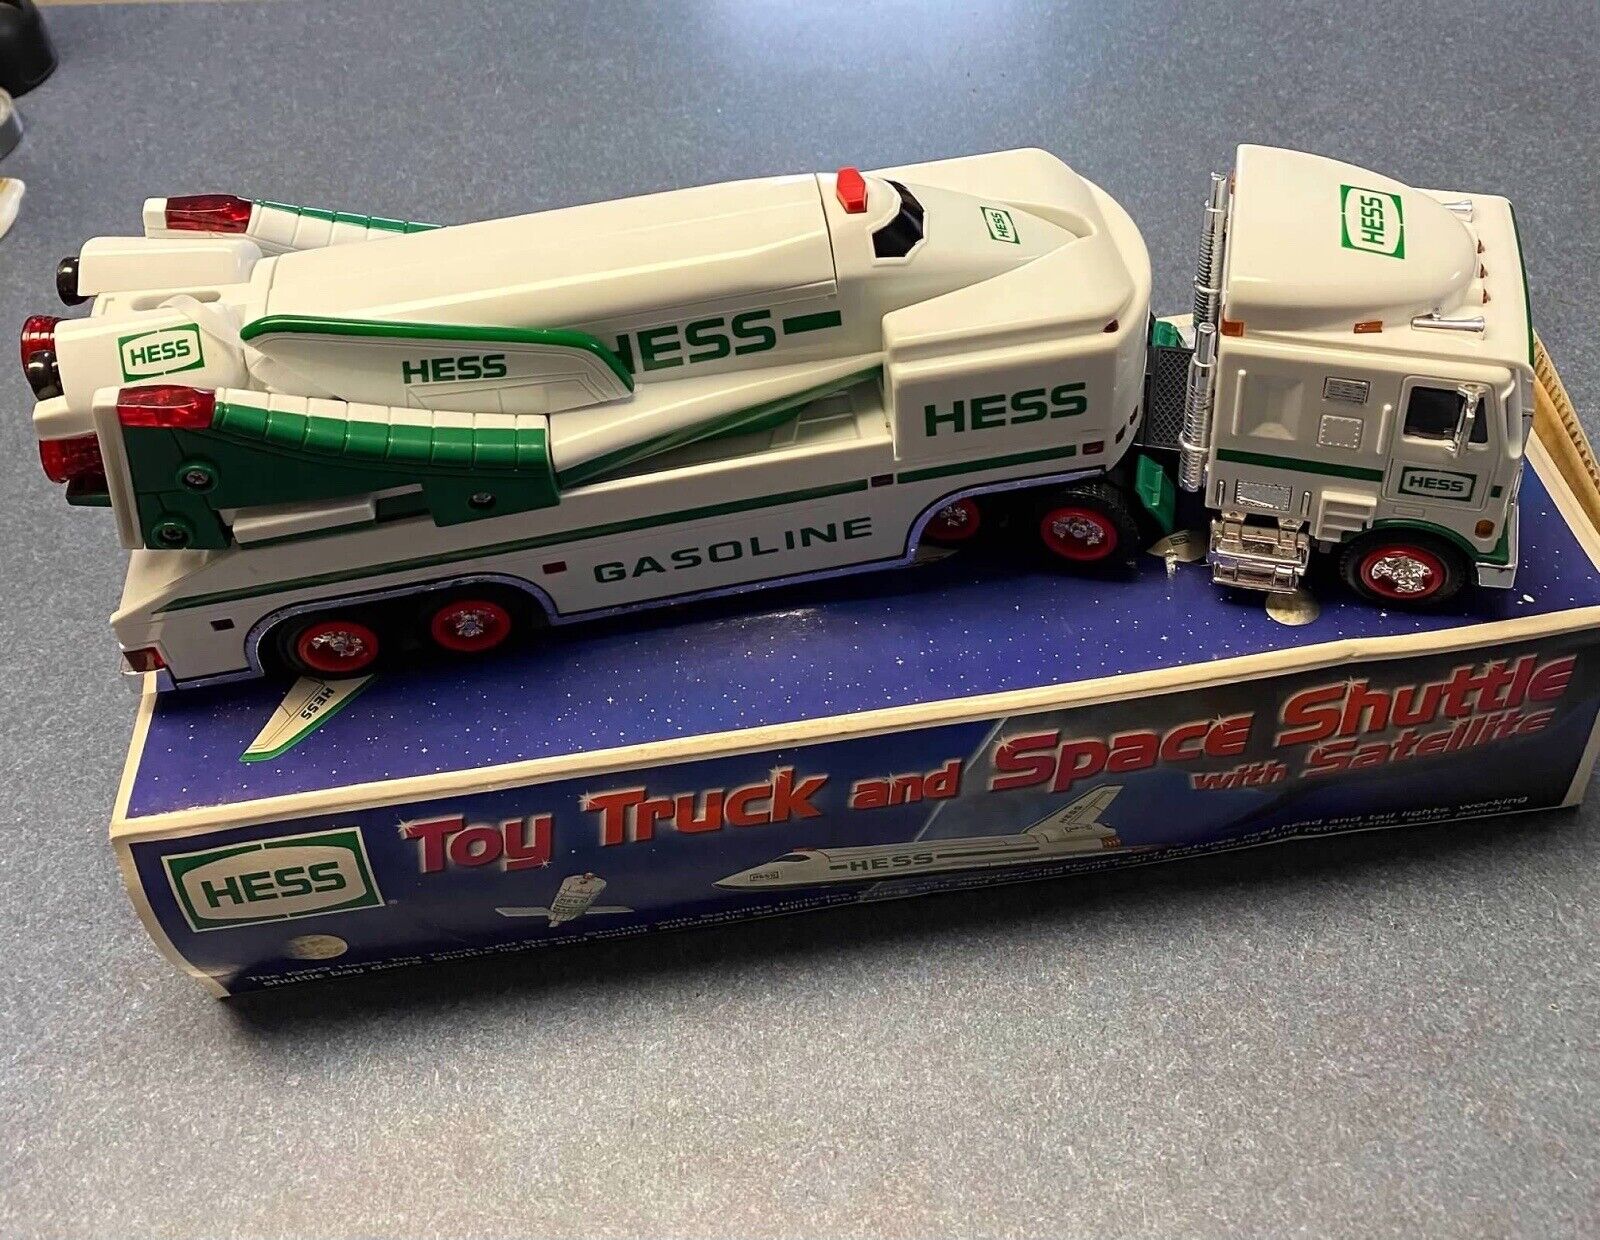 Vintage 1999 Hess Toy Truck and Space Shuttle With Satellite- New In Box